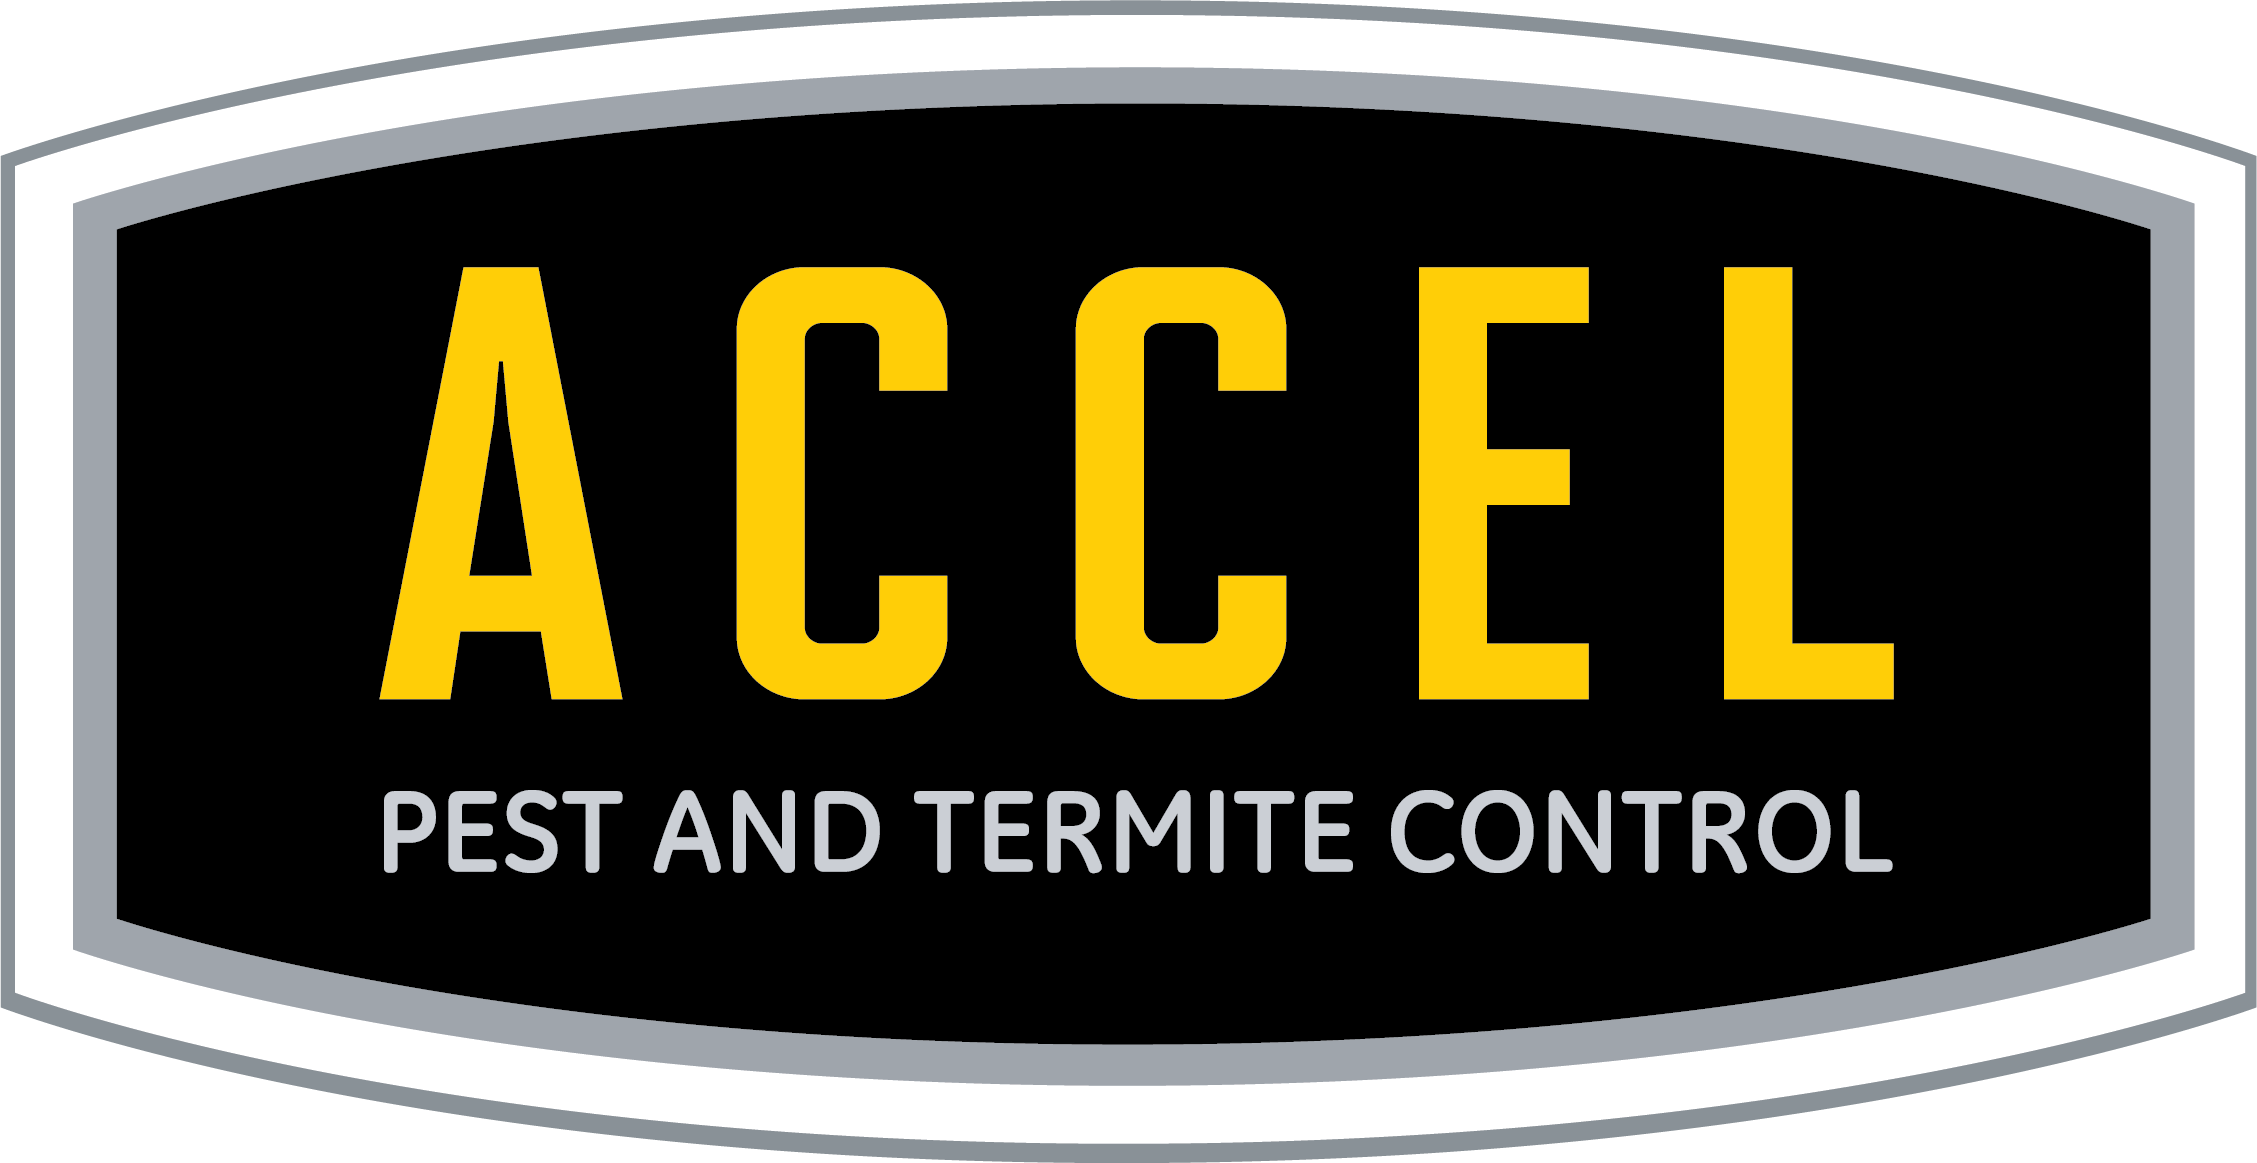 Accel Pest and Termite Control